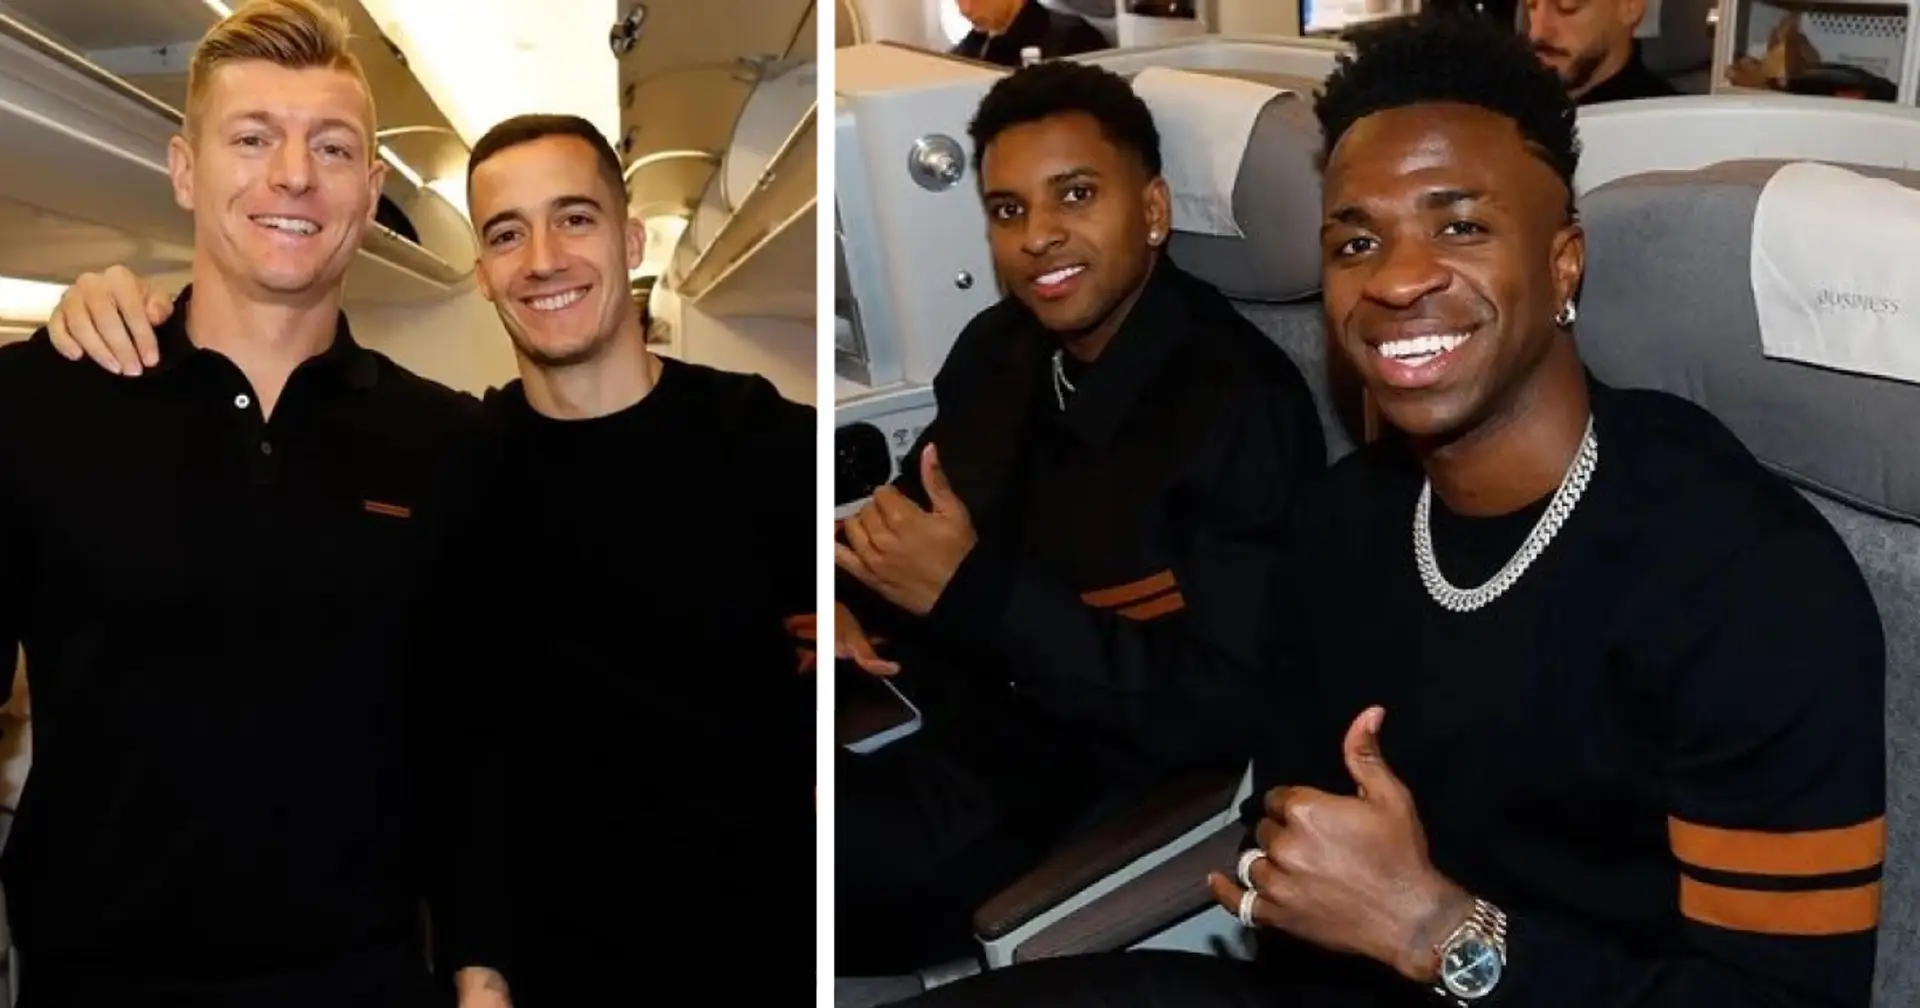 Real Madrid set out to Germany for Champions League knockout – 10 best pics of Los Blancos in all black